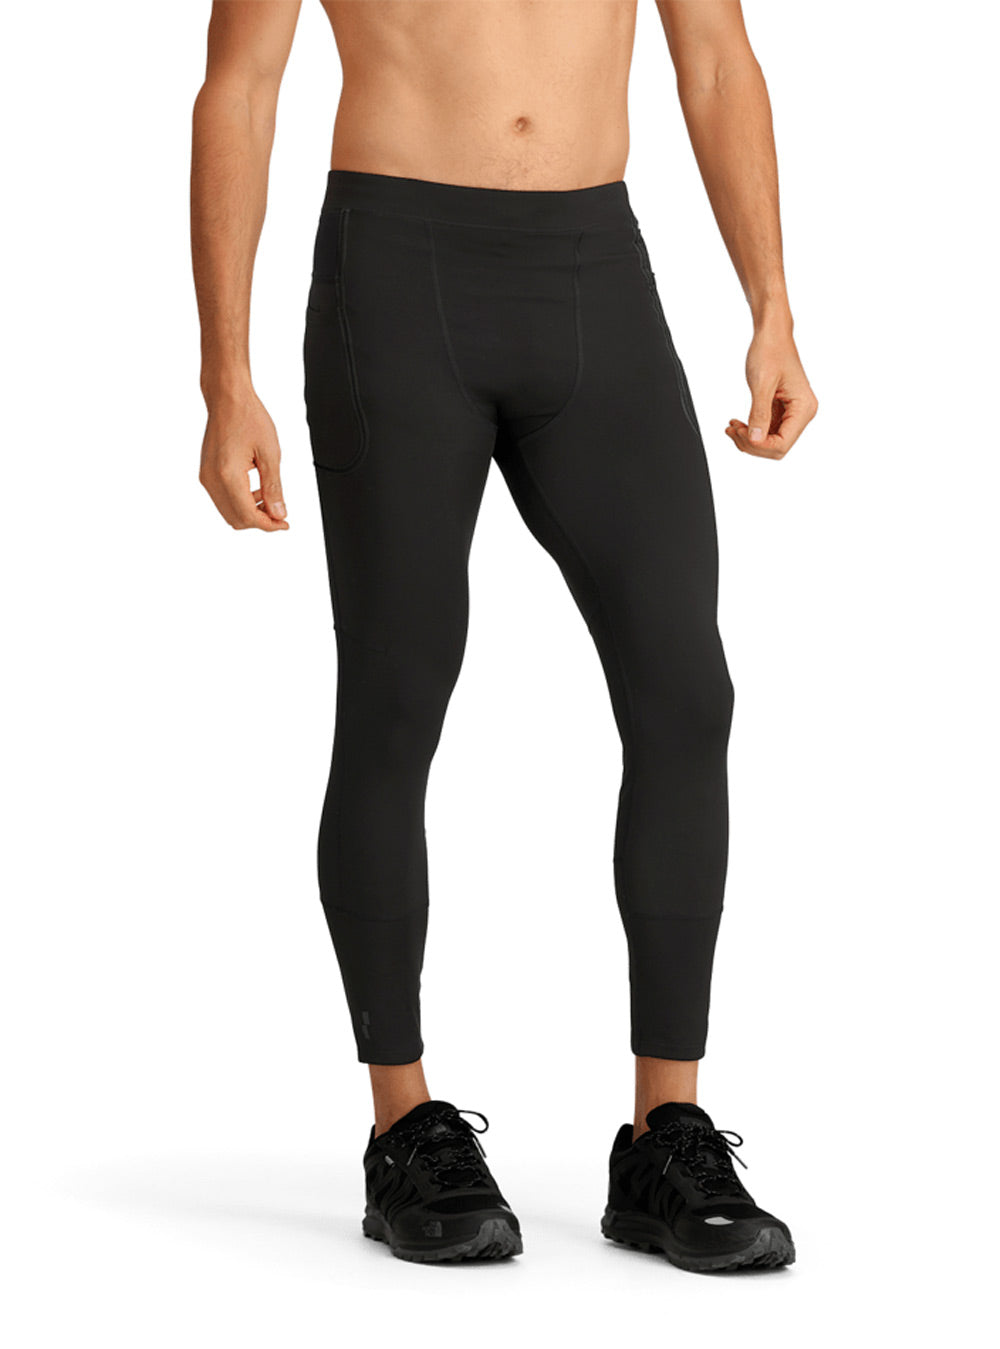 The North Face Winter Warm Pro Tights